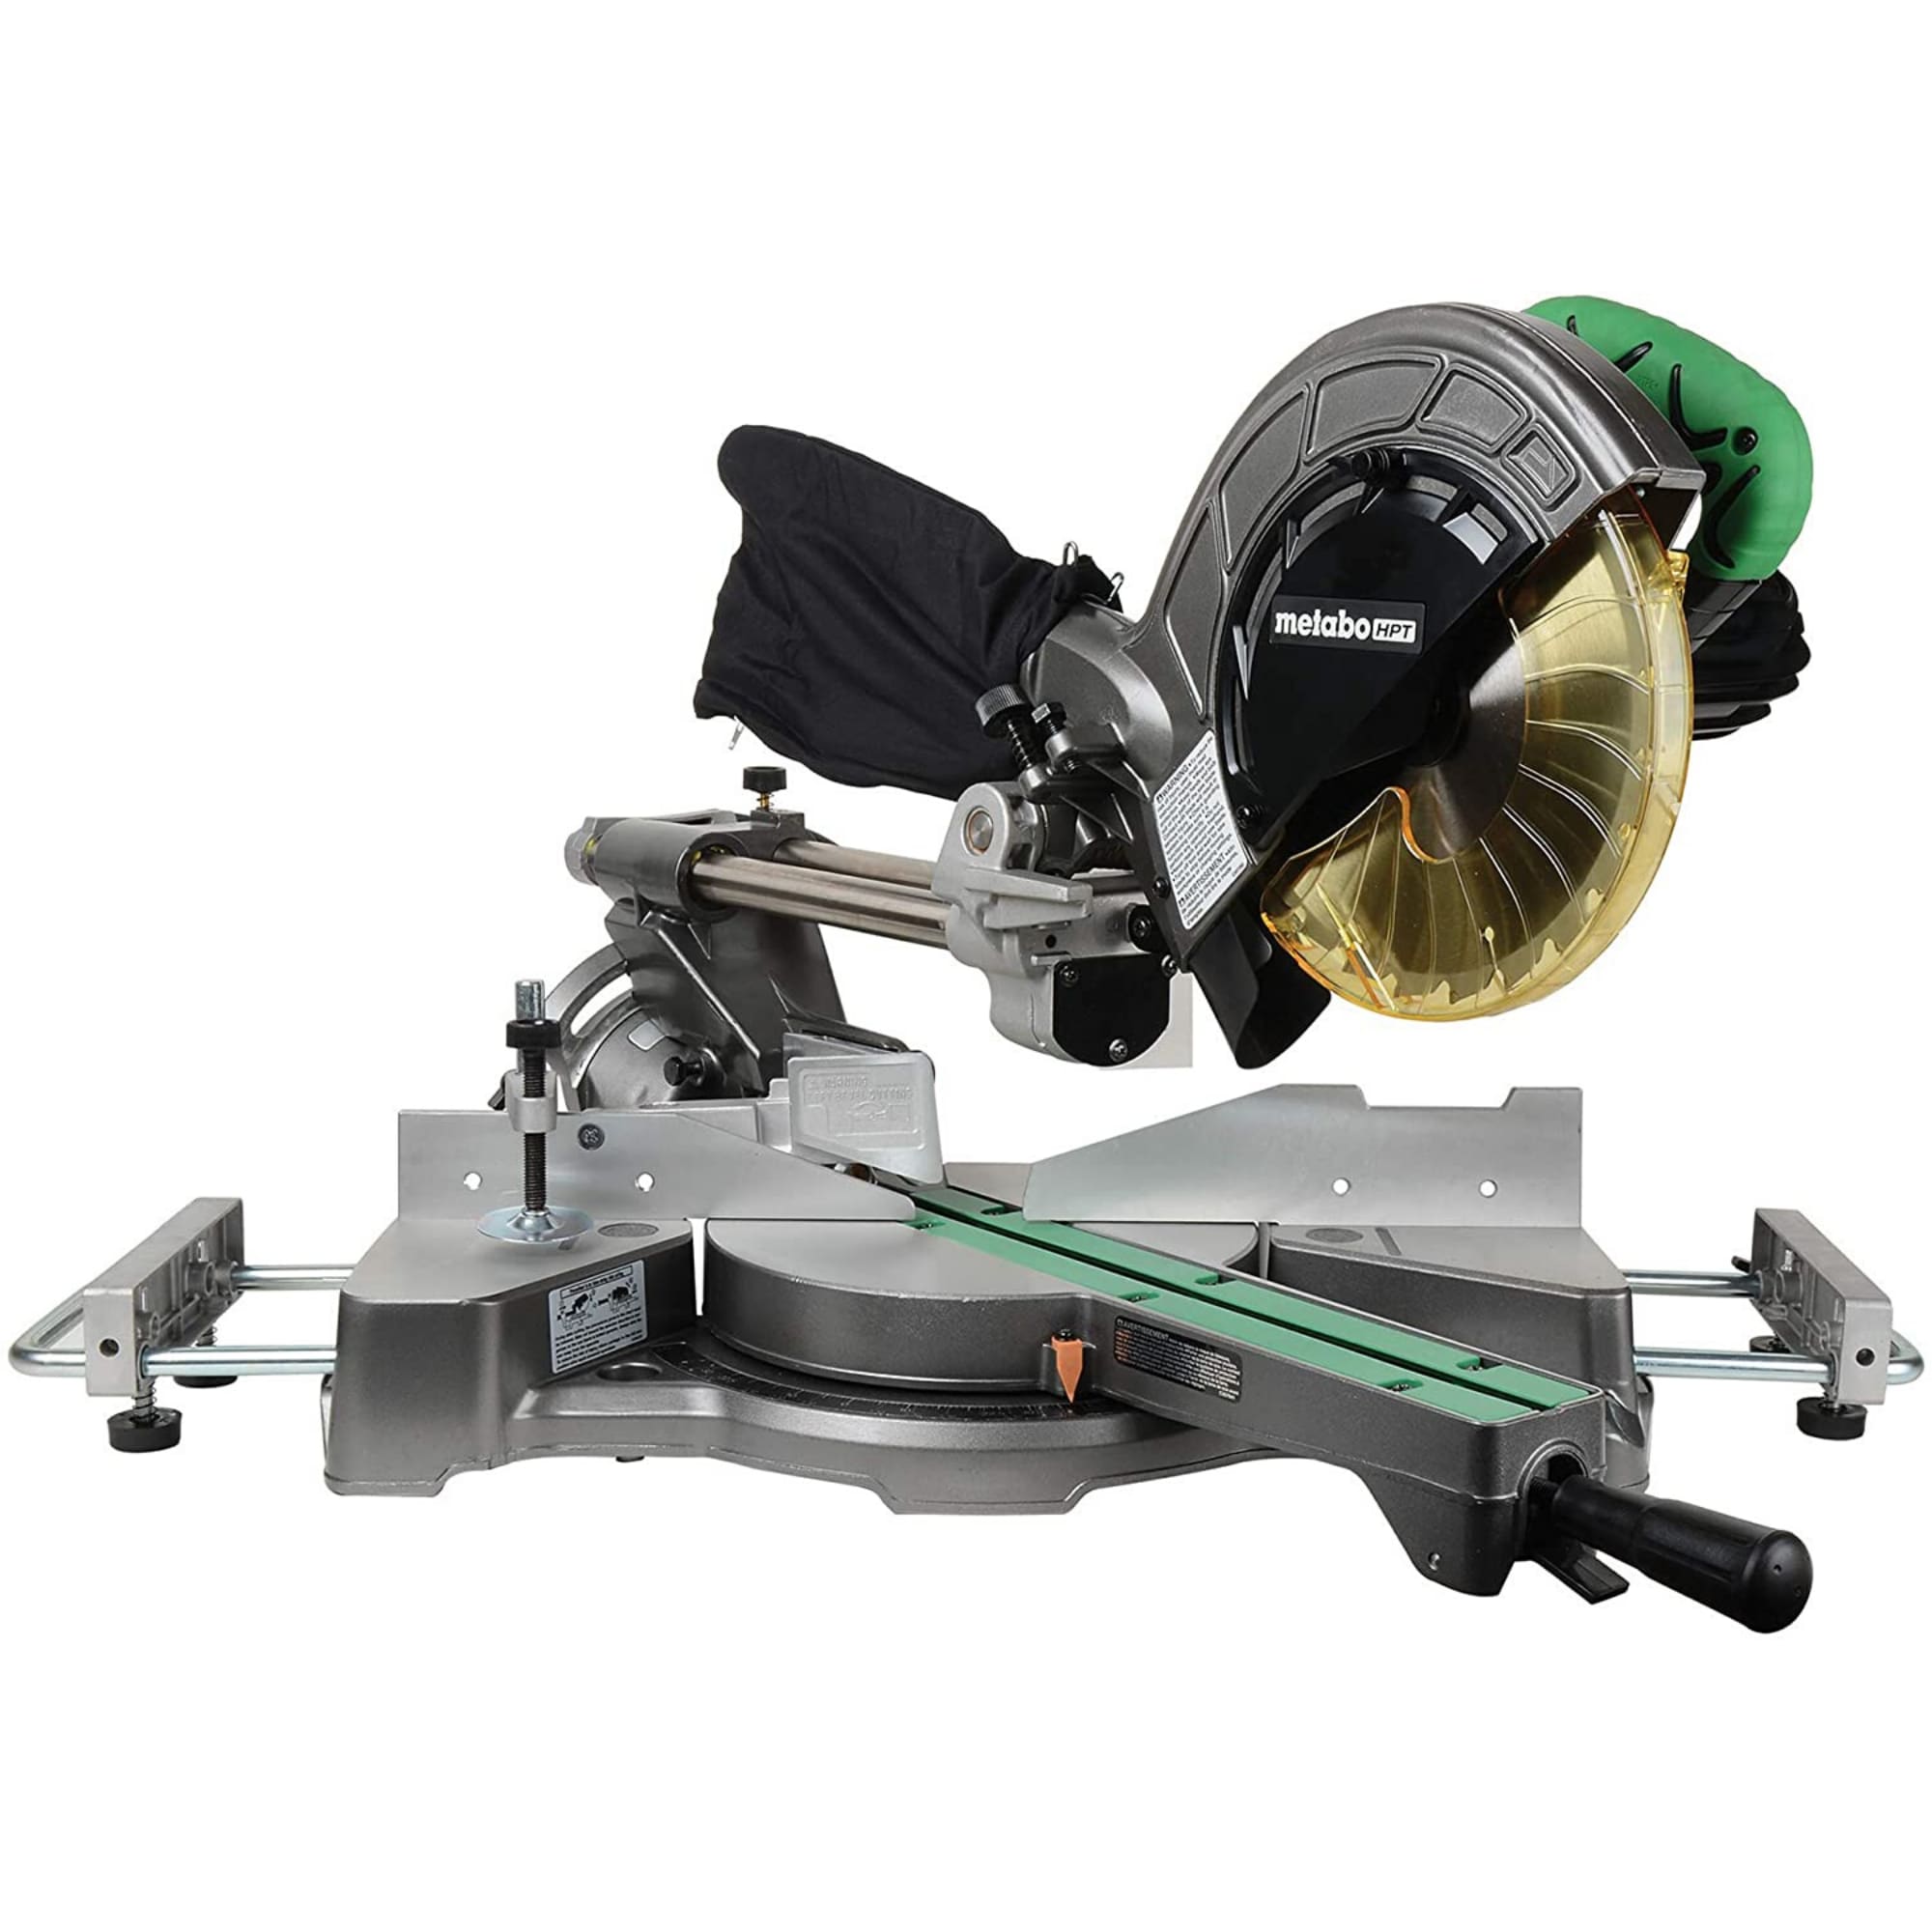 12 Double-Bevel Sliding Compound Miter Saw At